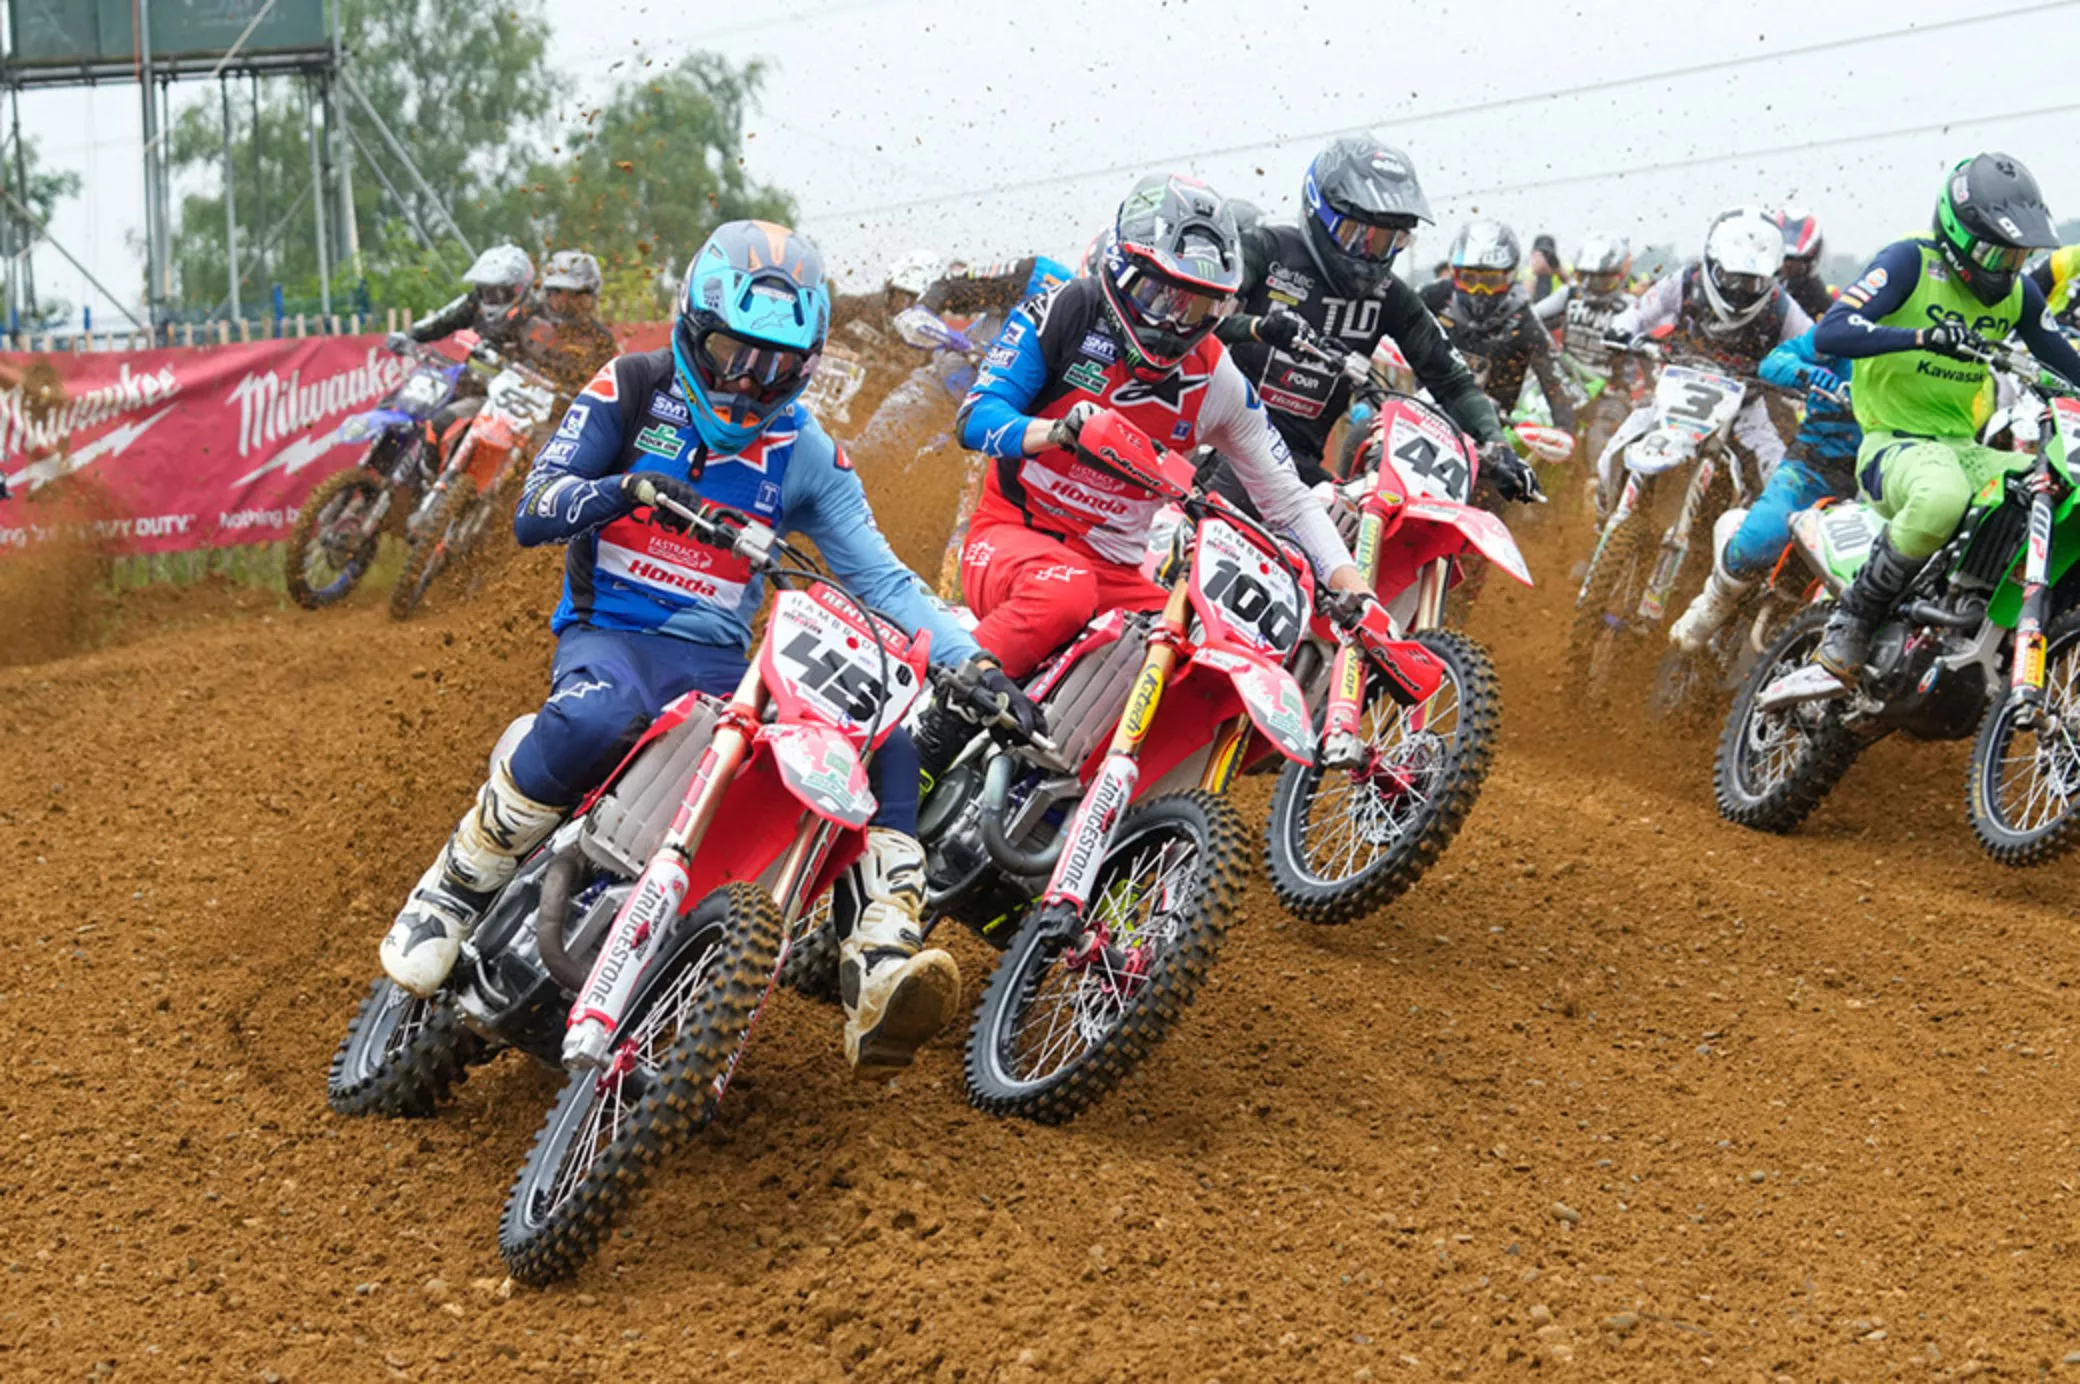 AT Motocross in United Kingdom, Europe | Motorcycles - Rated 0.7